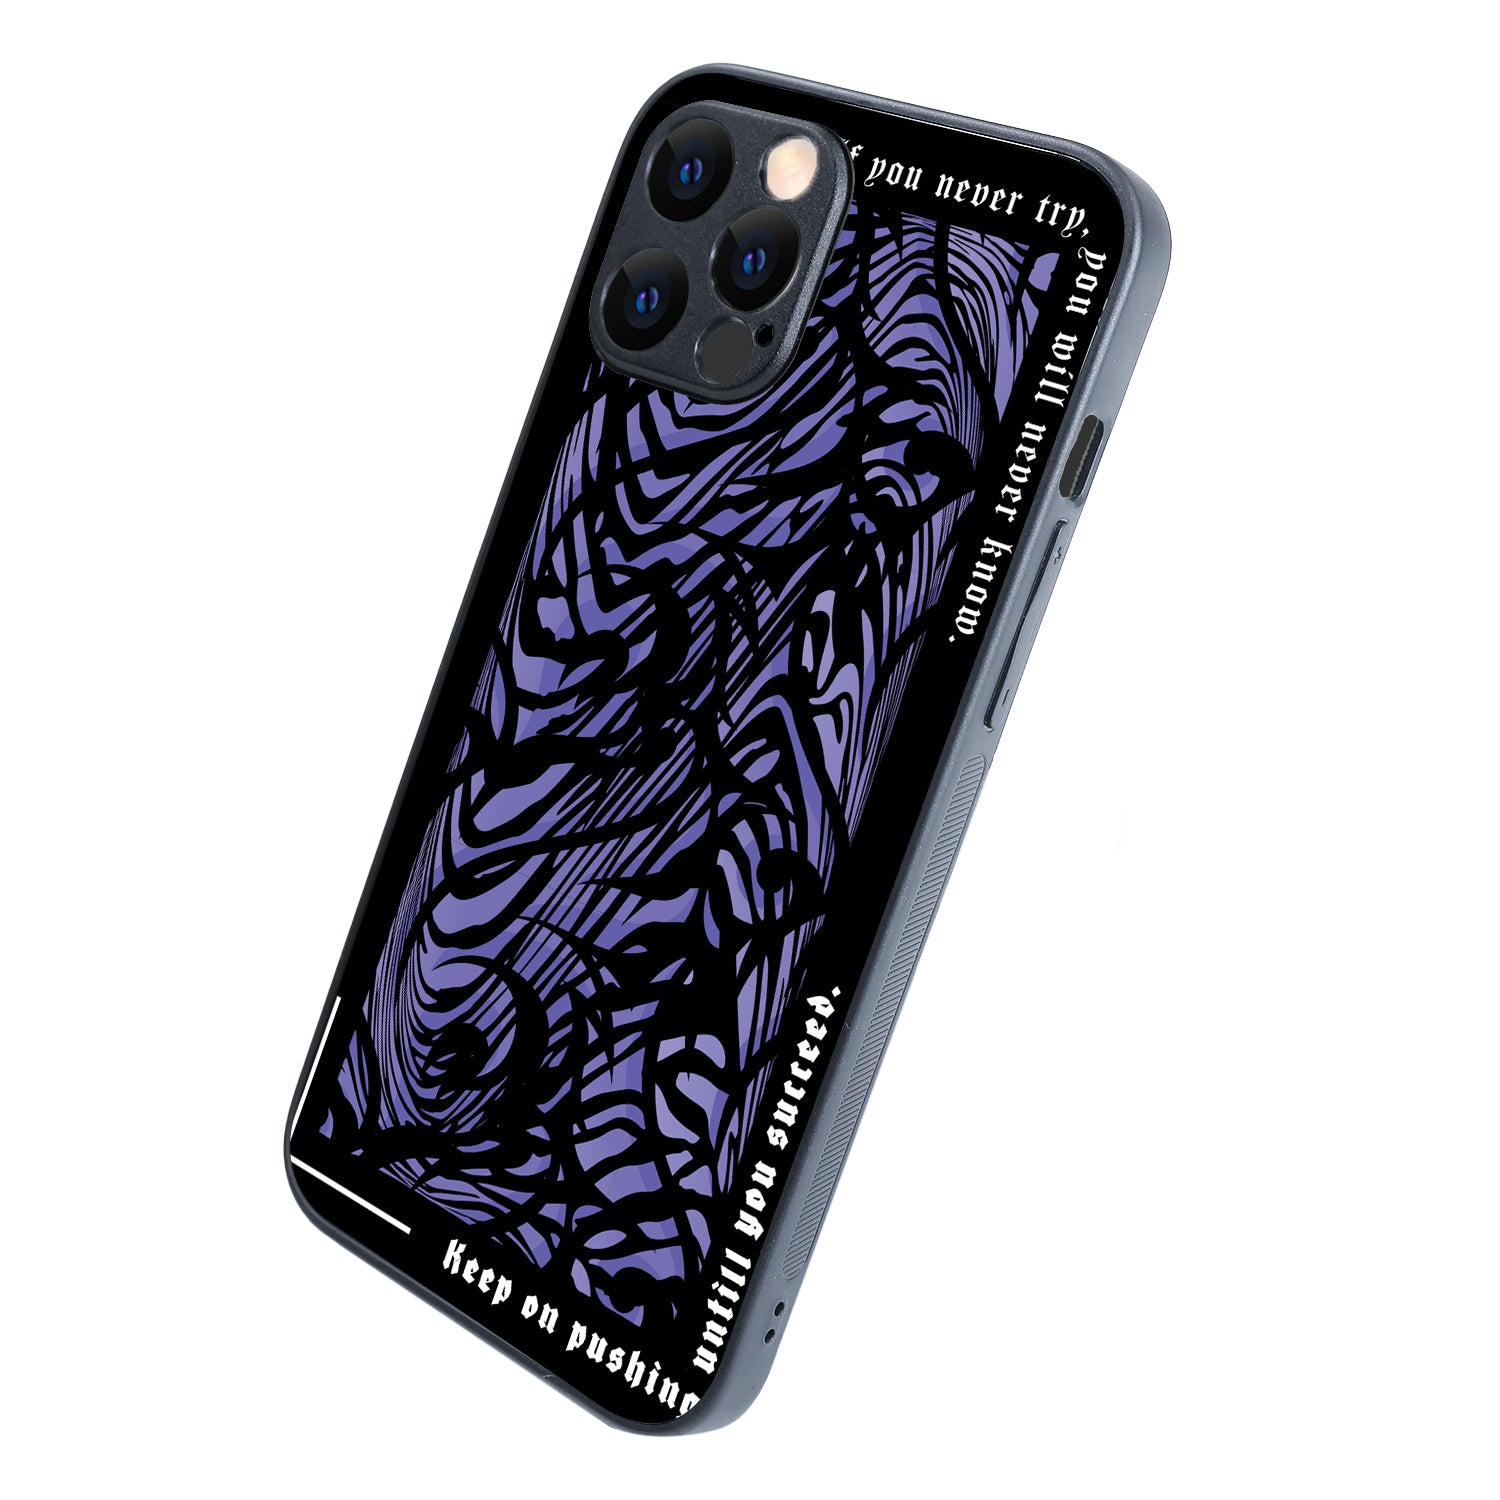 Keep On Pushing Quote iPhone 12 Pro Max Case